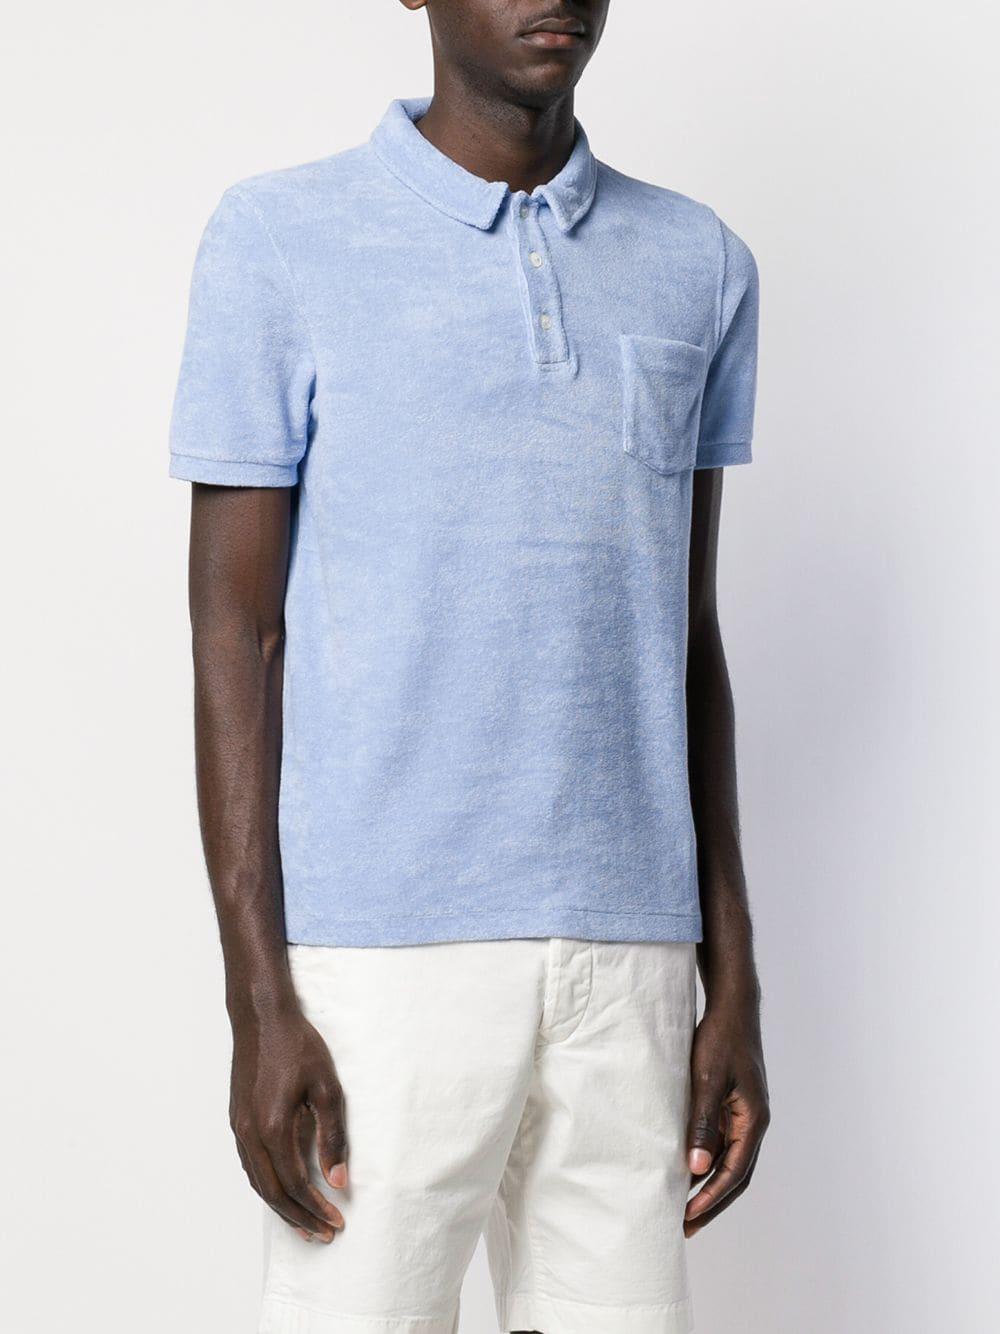 Closed Towelling Polo Shirt in Blue for Men - Lyst